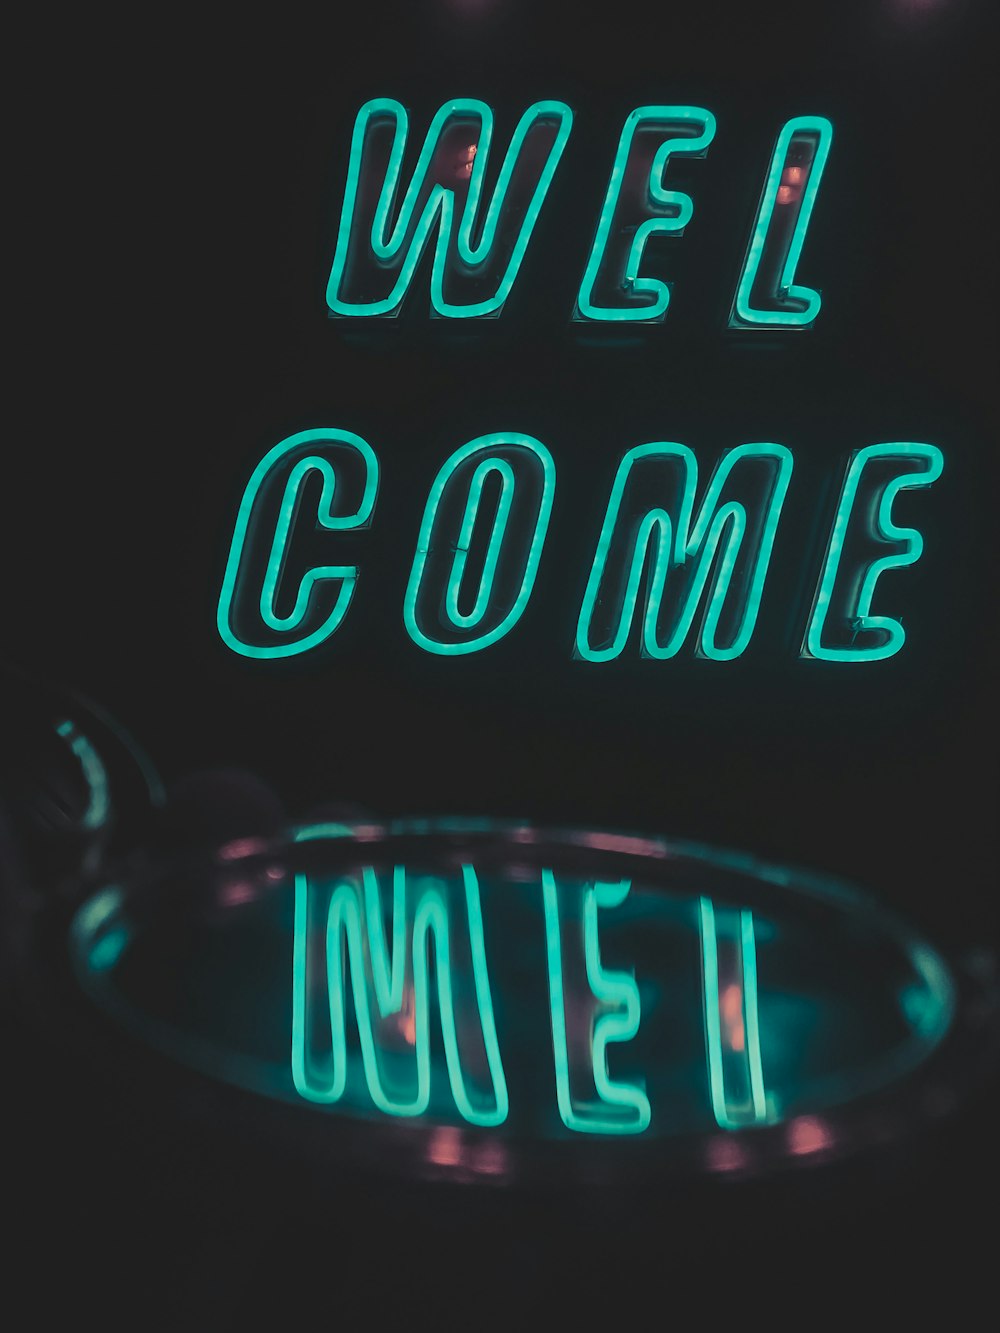 a neon sign that says we'll come under a magnifying glass